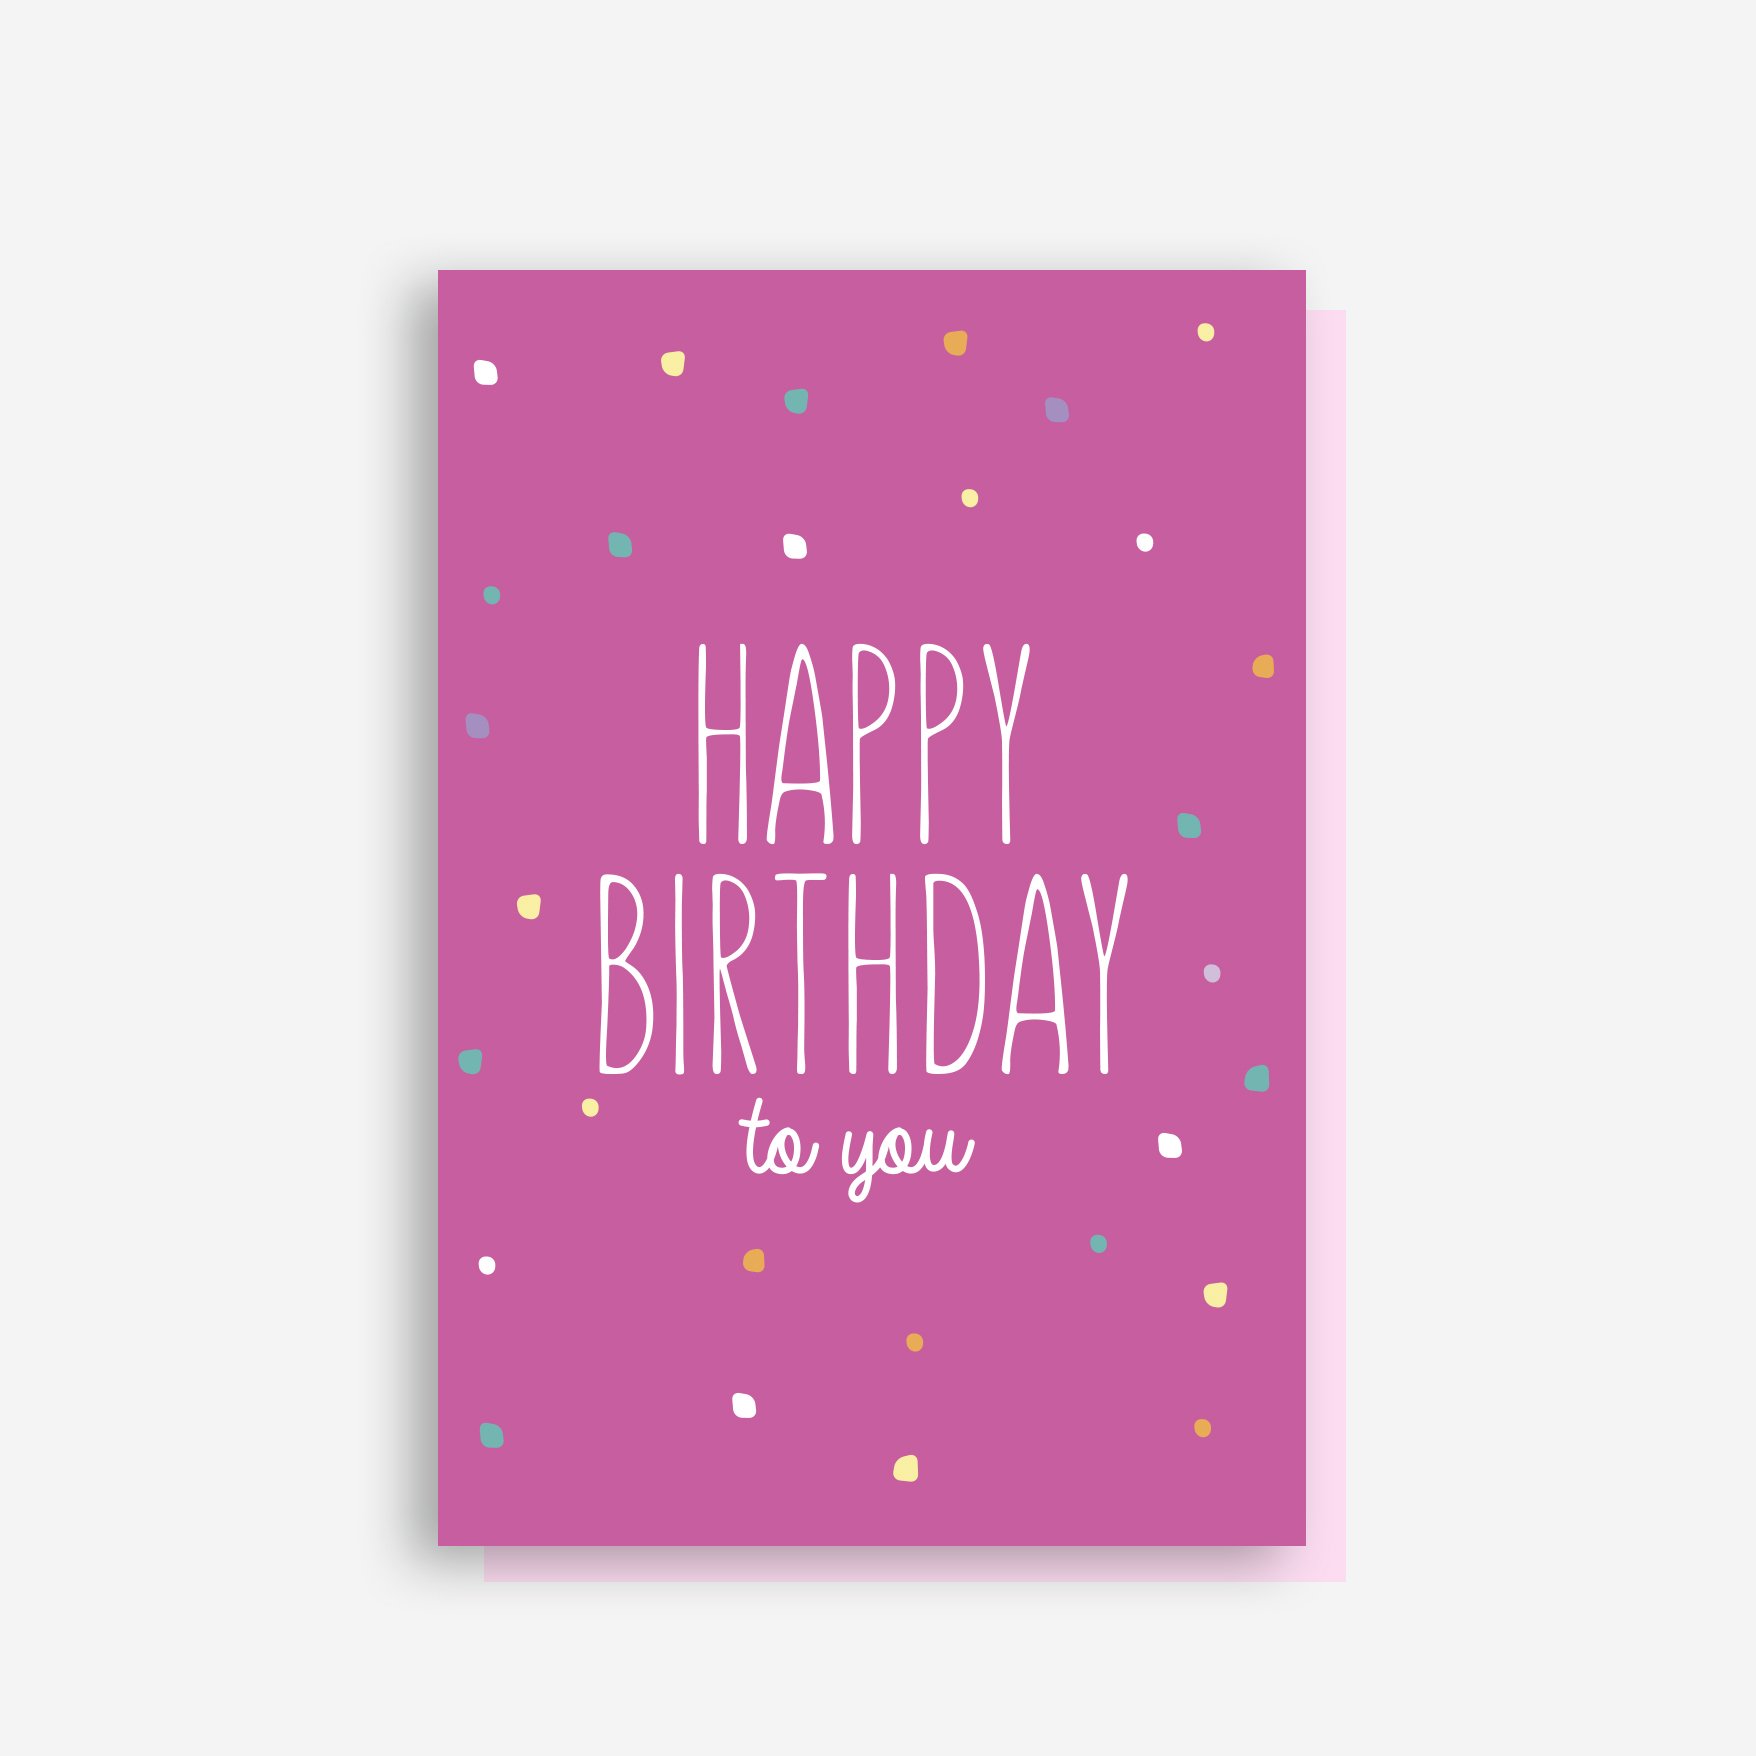 Cheap Greeting Cards